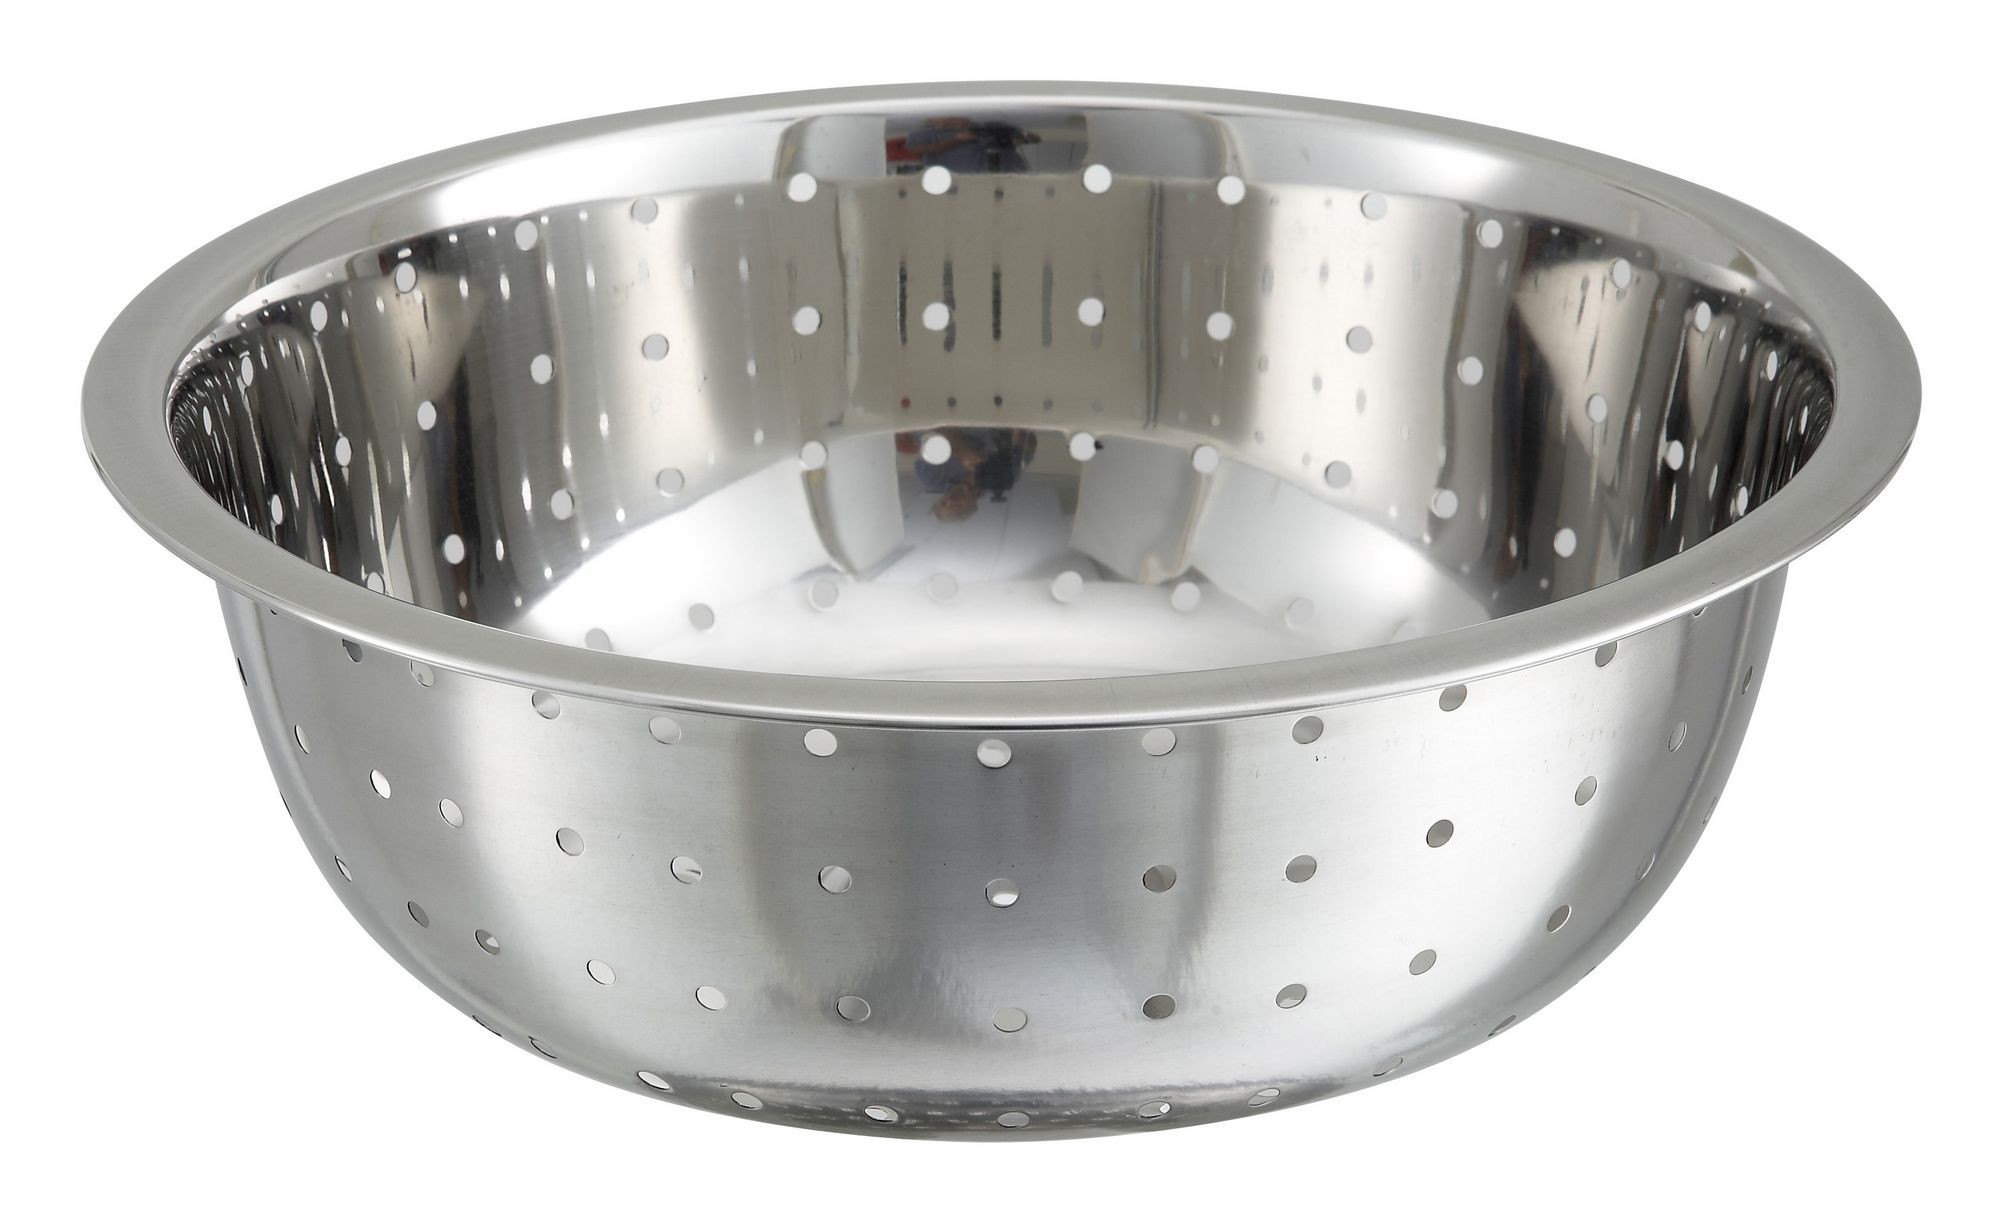 Winco COD-8 Stainless Steel Colander with Base, 8-Quart by Winco 